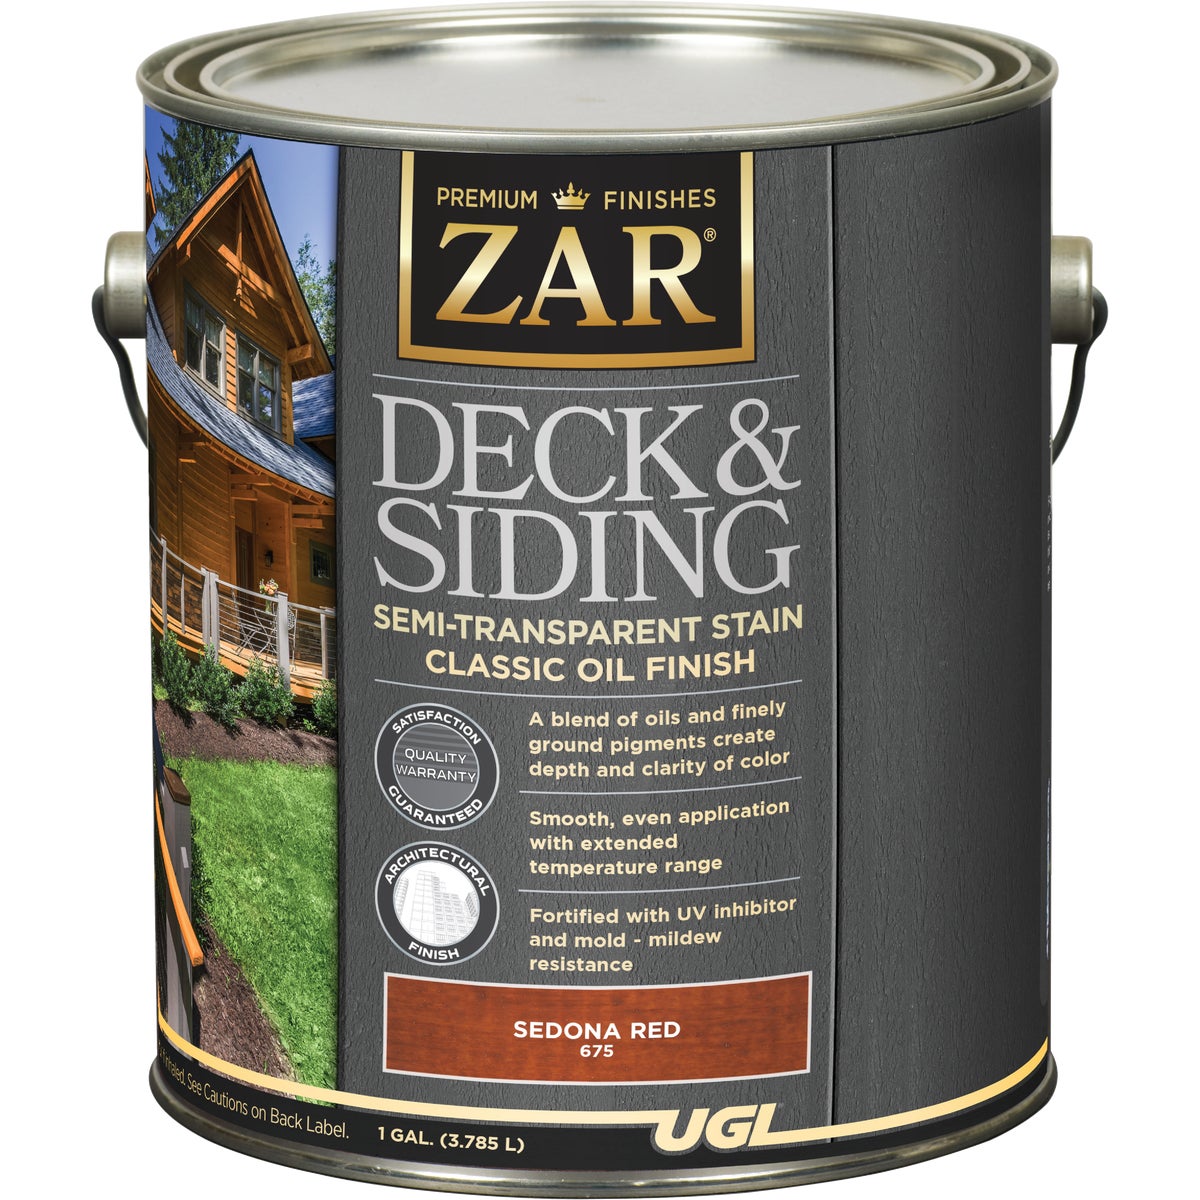 ZAR Semi-Transparent Deck and Siding Stain, Sedona Red, 1 Gal.